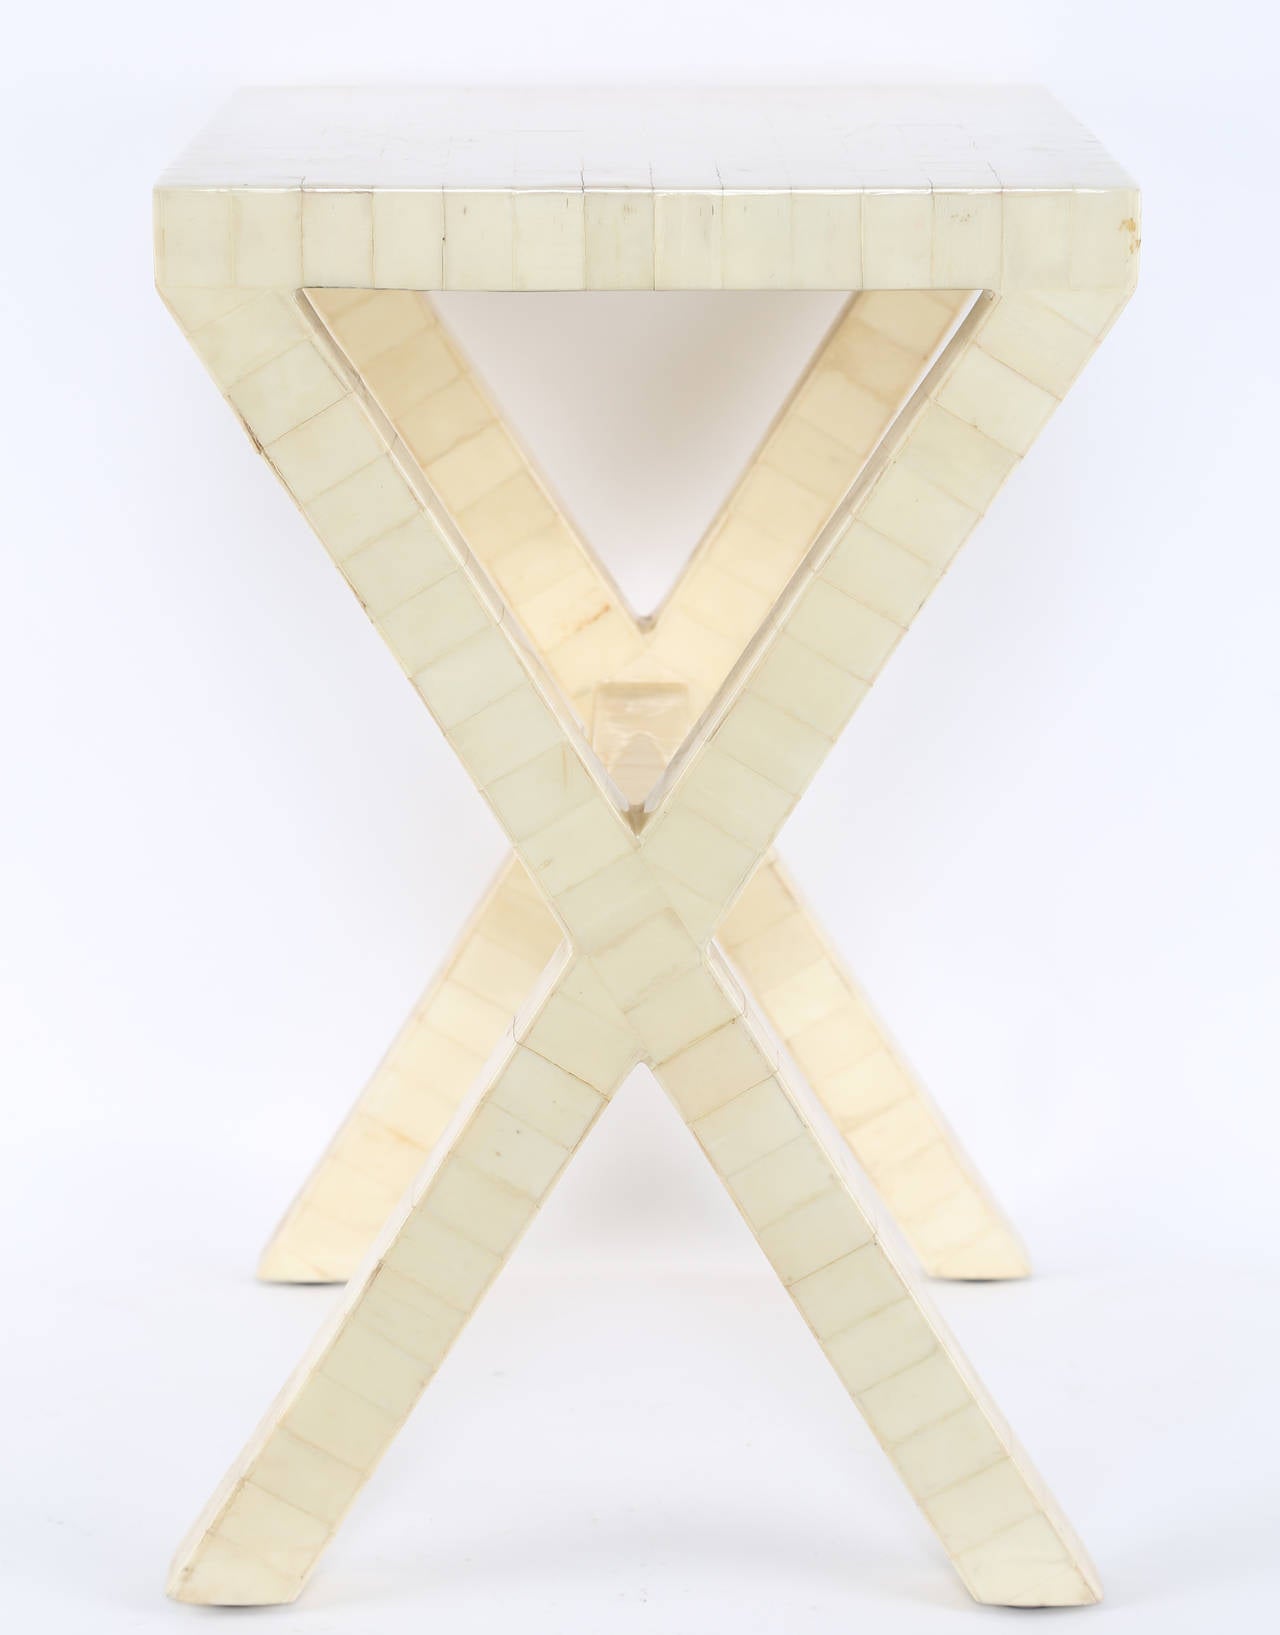 Late 20th Century Tessellated Bone Side Table By Enrique Garces, circa 1970s For Sale